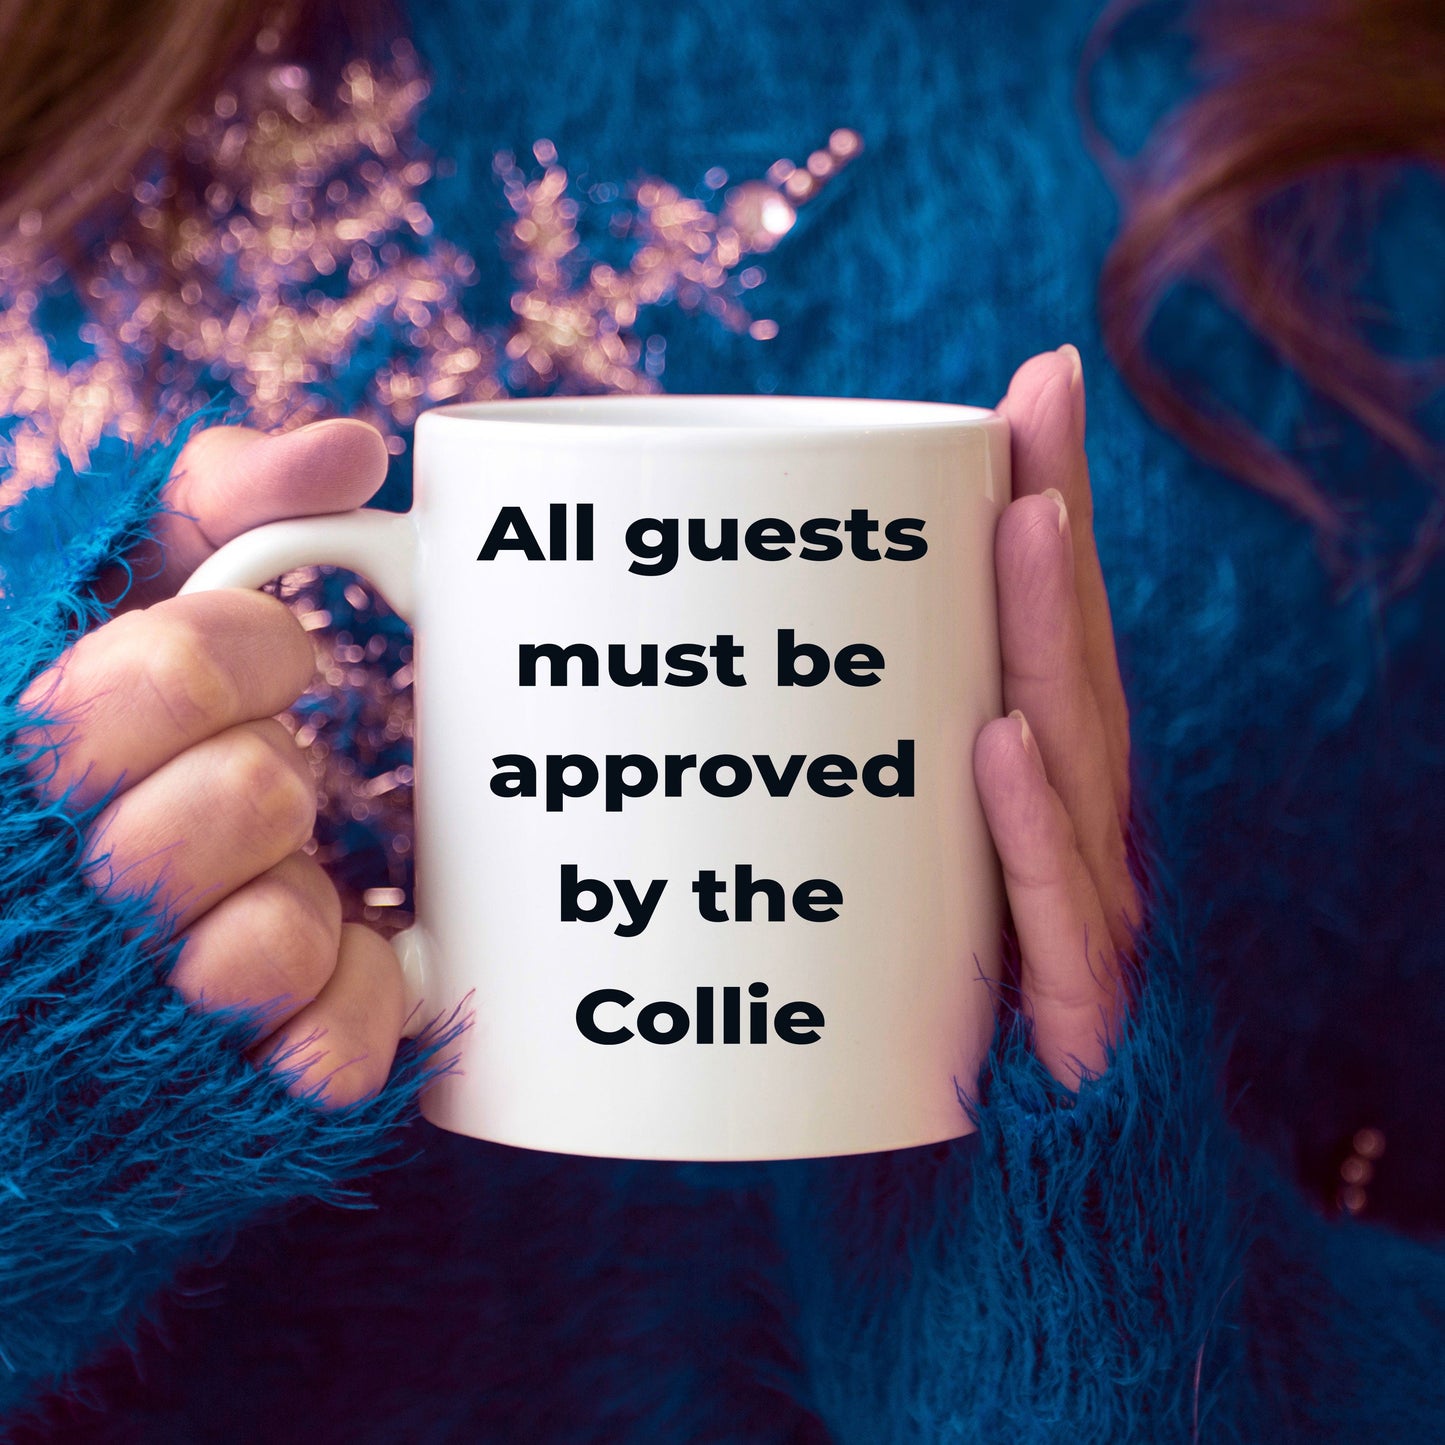 Rough Collie Coffee Mug - All guests must be approved by the Collie